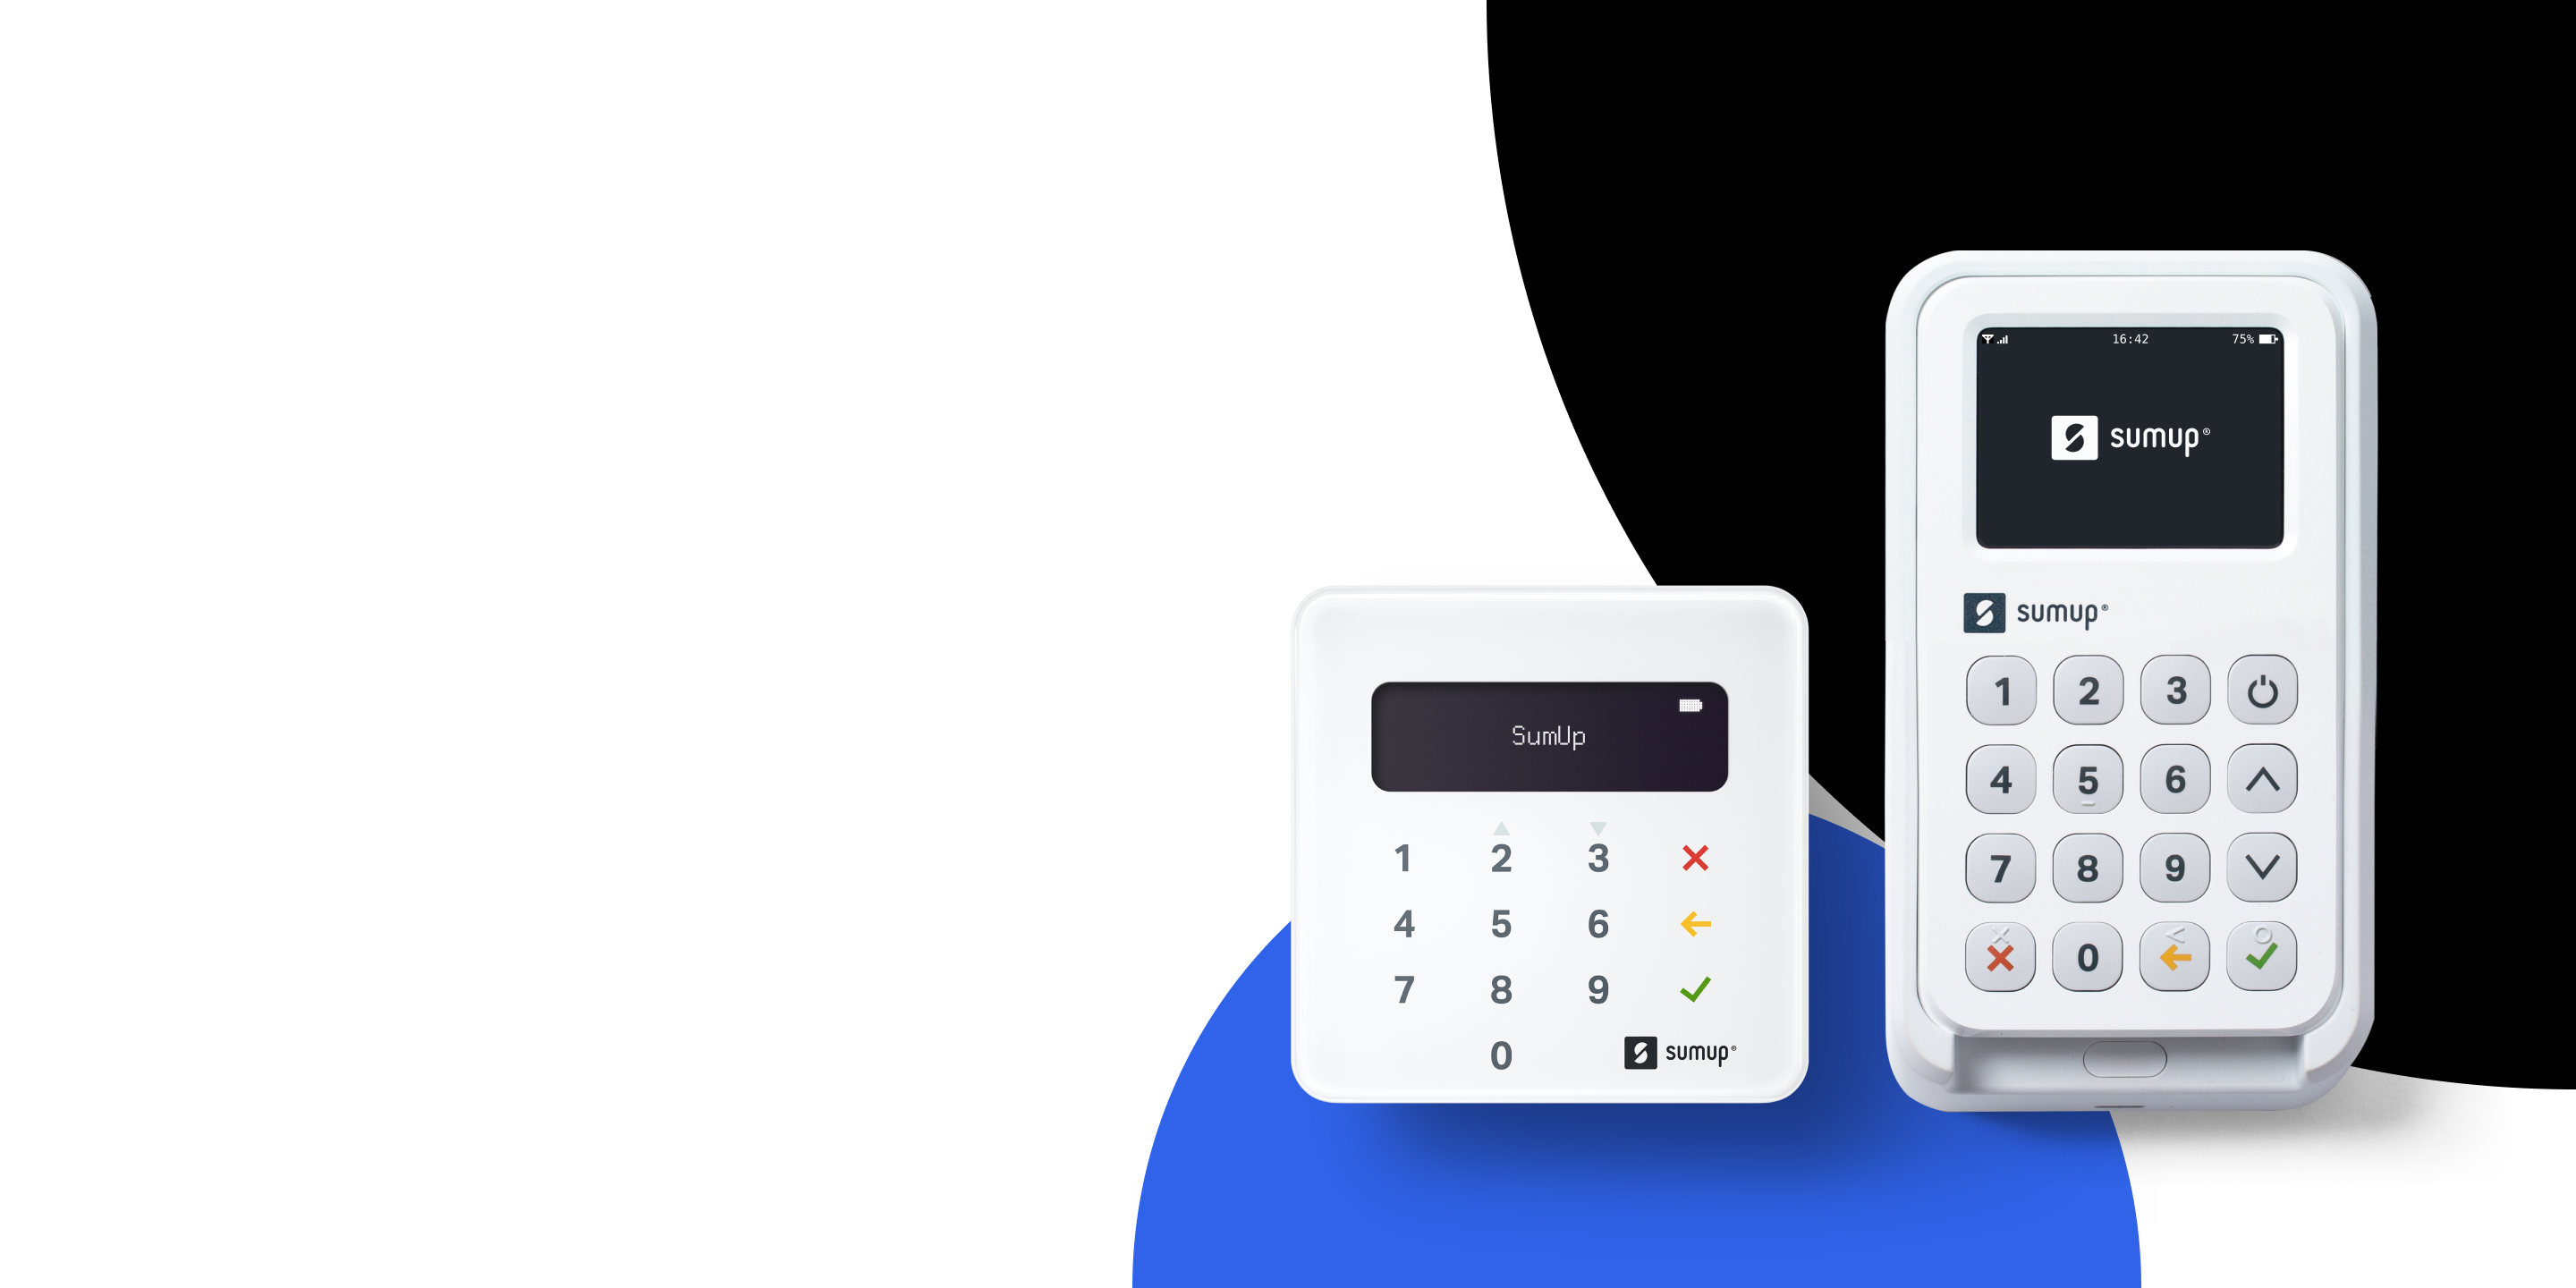 SumUp Air Card Reader Mobile Contactless Payment Machine